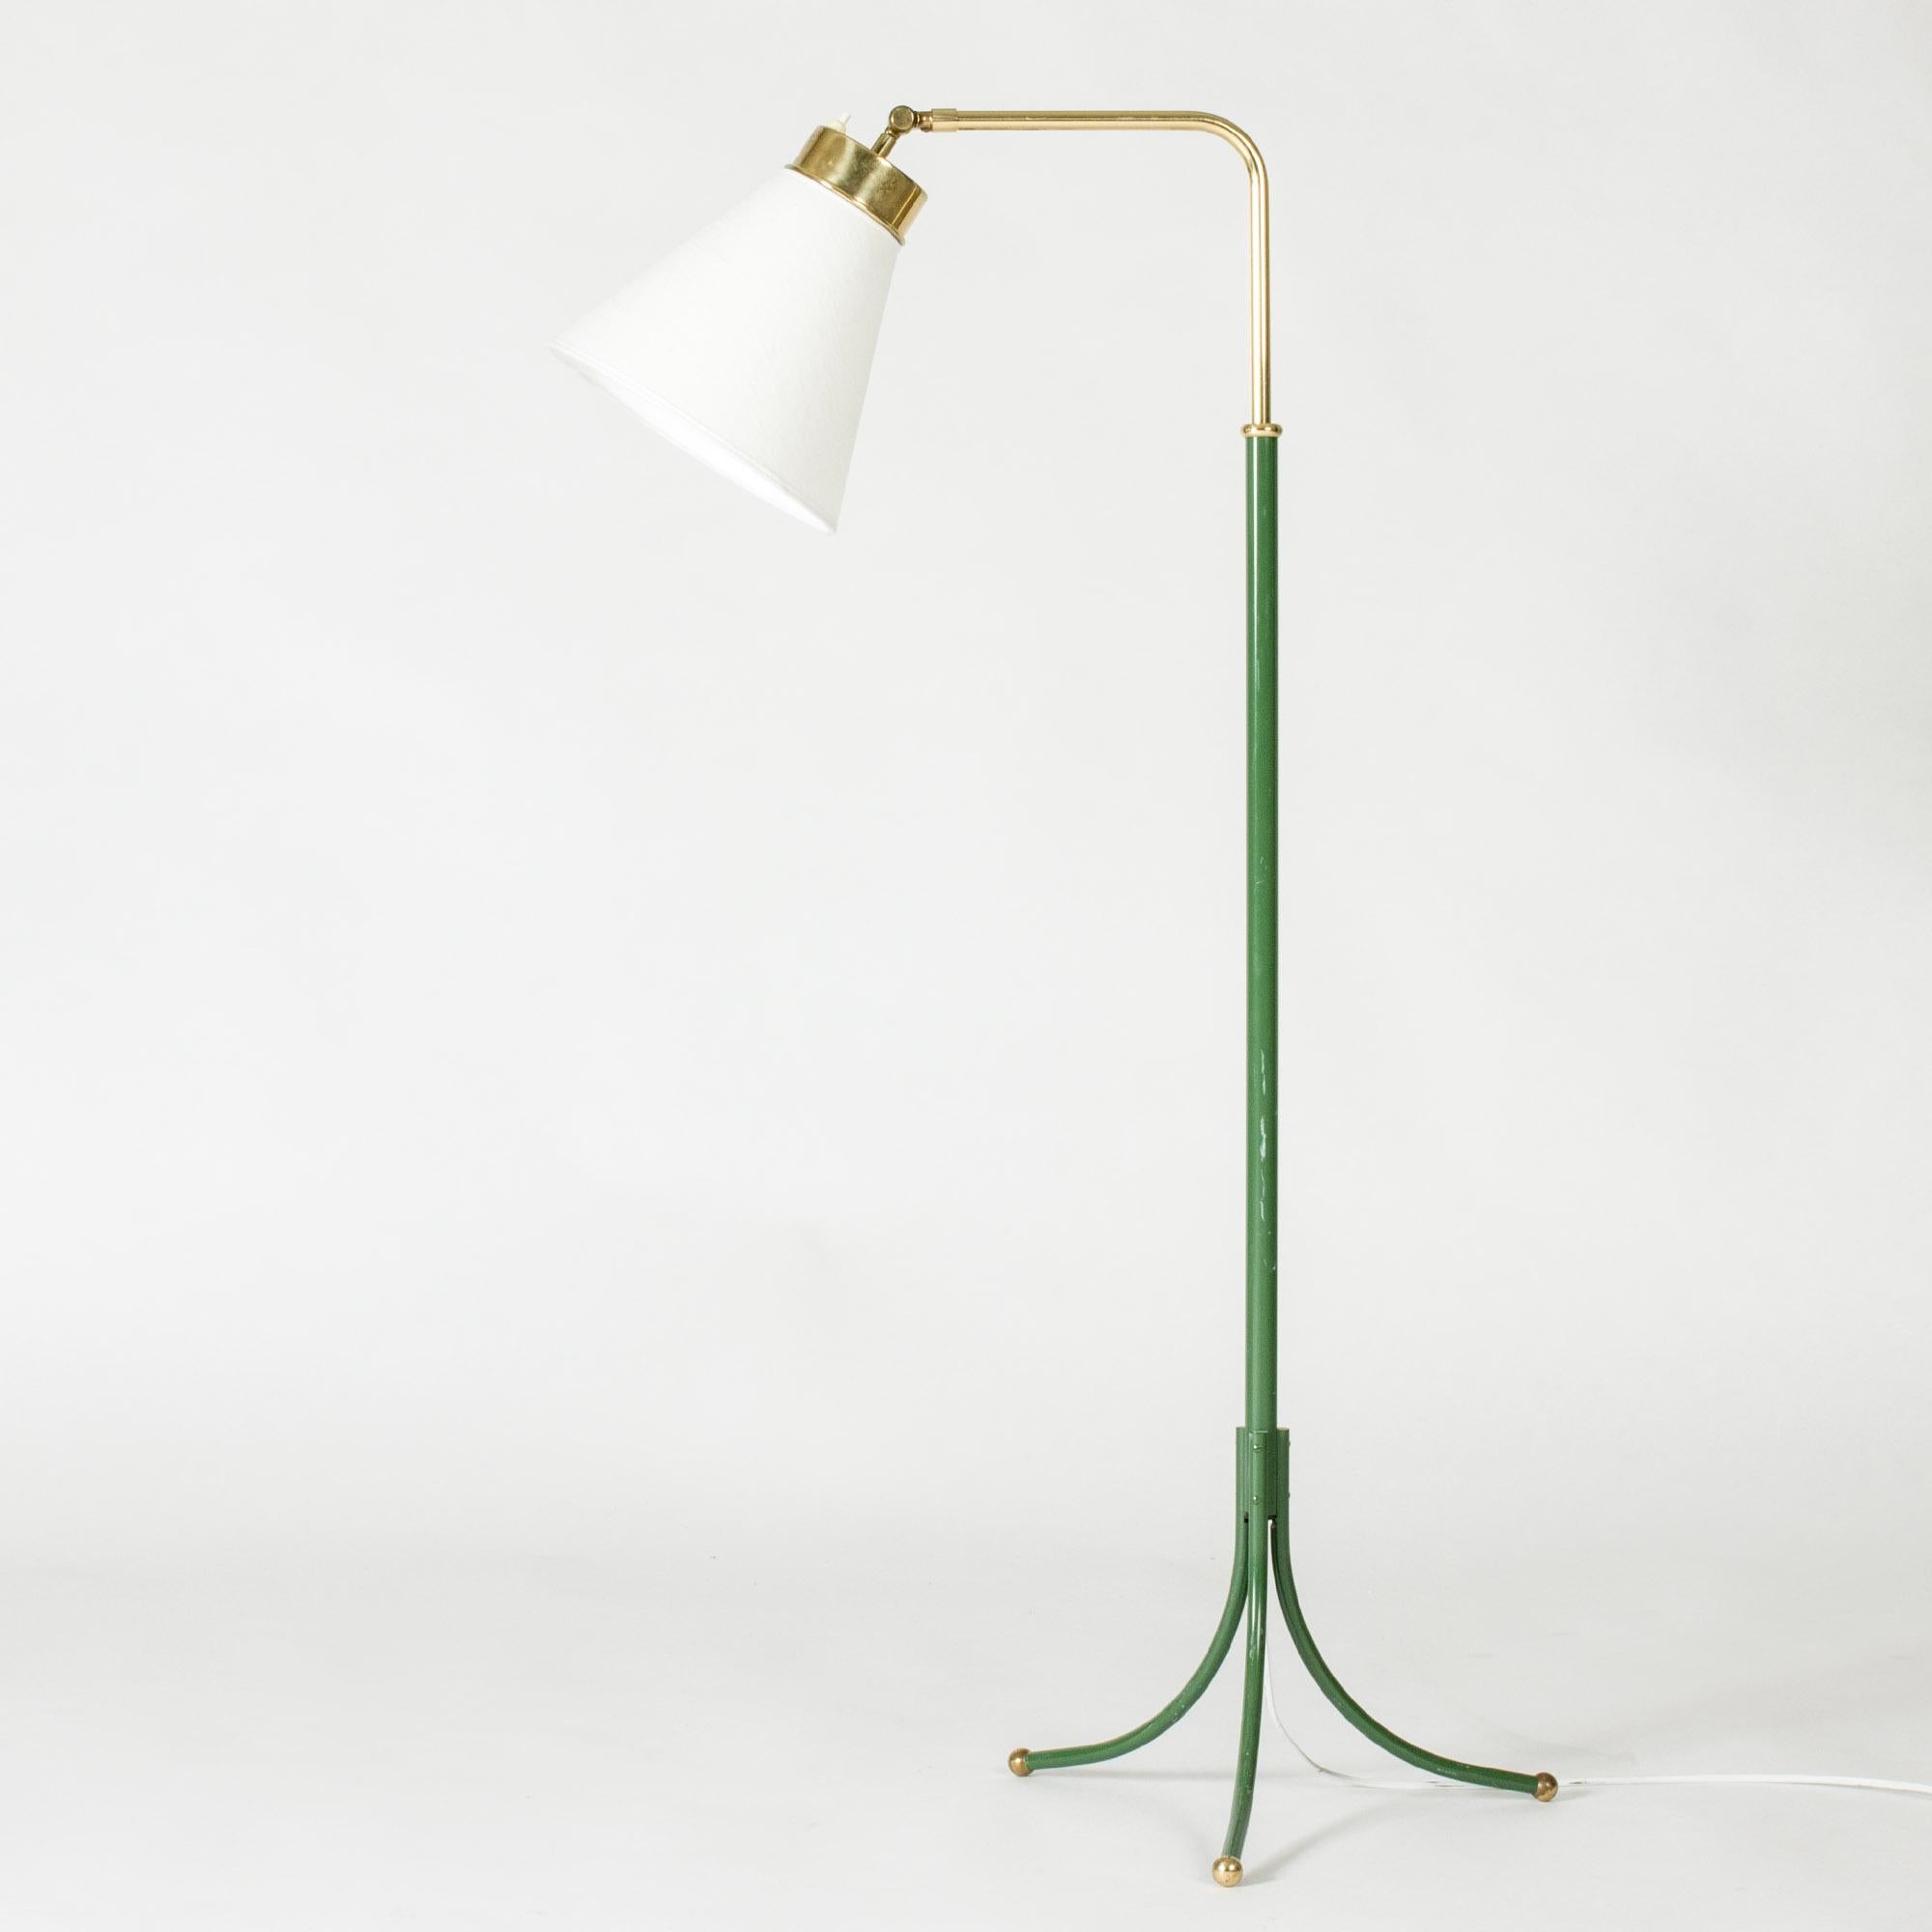 Brass floor lamp with green stem by Josef Frank, model 1842. Designed in 1932. Slender form with nicely curved tripod base, with balls at the ends.

Height 97-150 cm.

About Josef Frank: 
Josef Frank was an Austrian-born architect and designer known